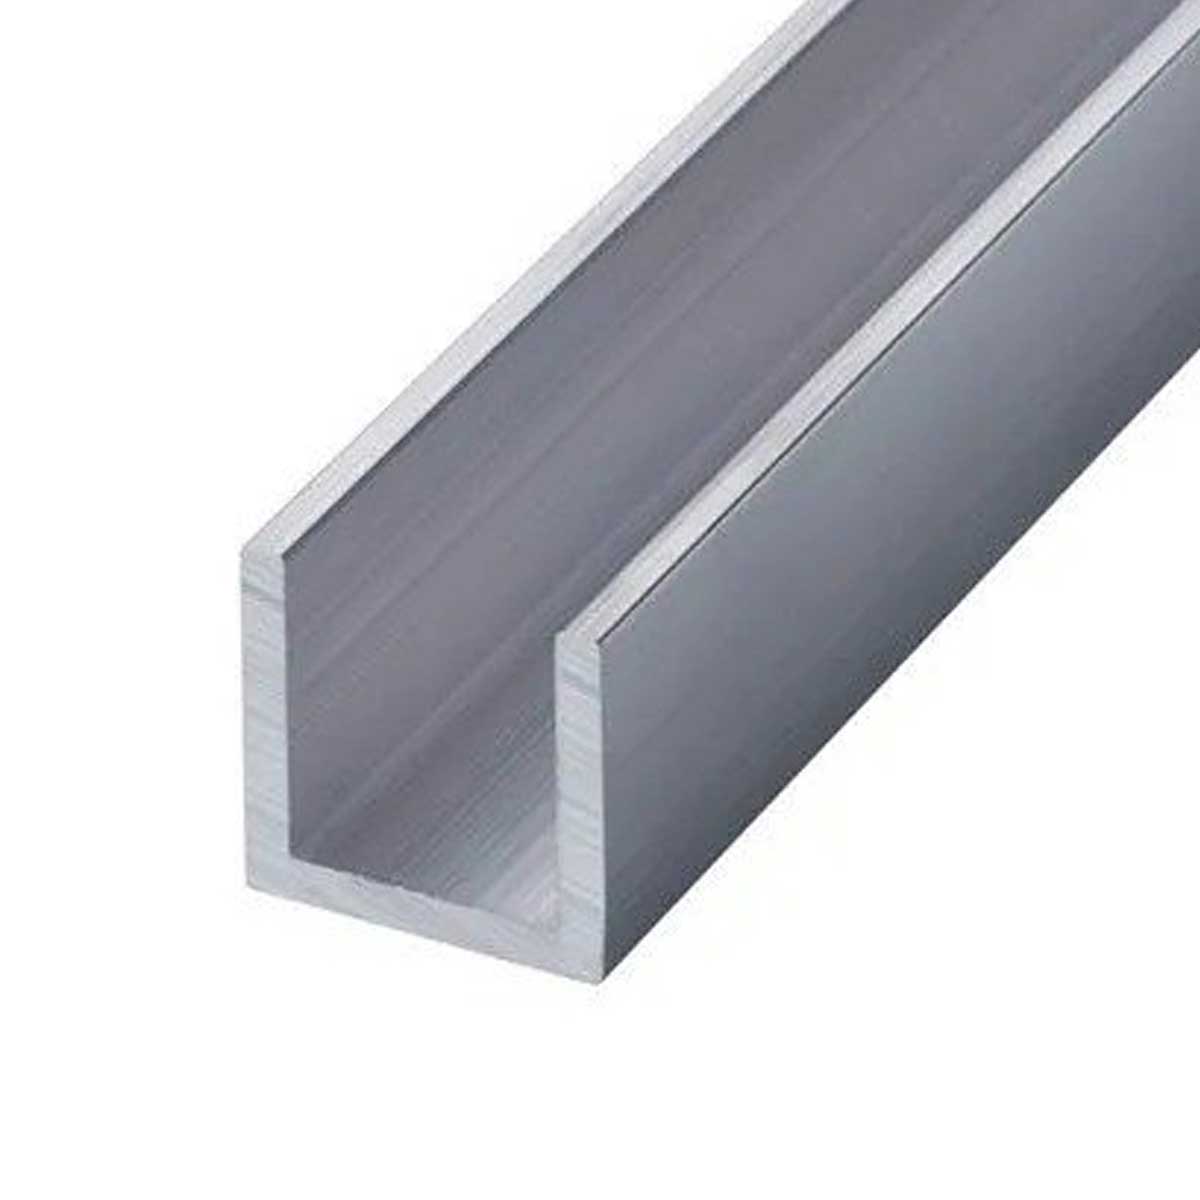 Aluminium C Channel For Construction Manufacturers, Suppliers in Telangana